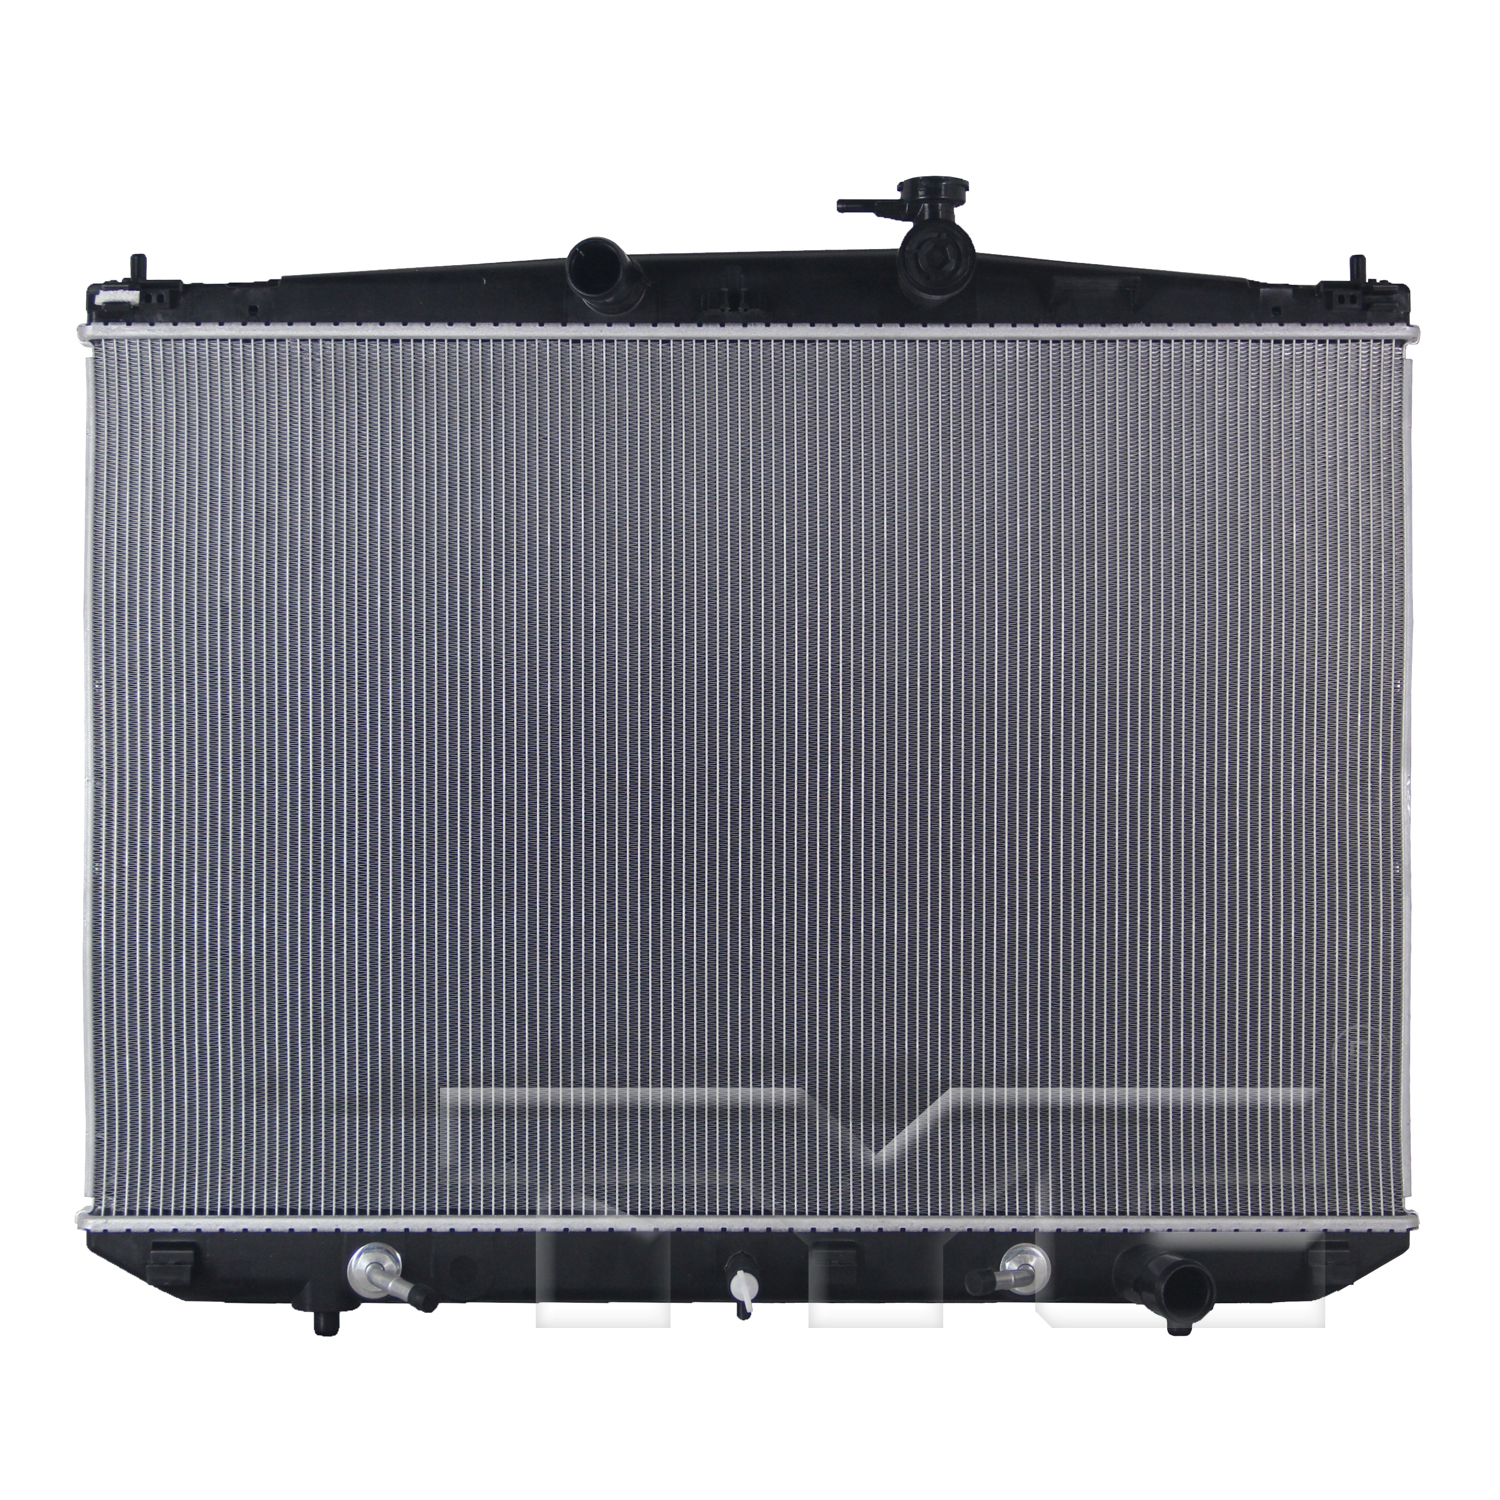 Aftermarket RADIATORS for LEXUS - RX350, RX350,16-22,Radiator assembly